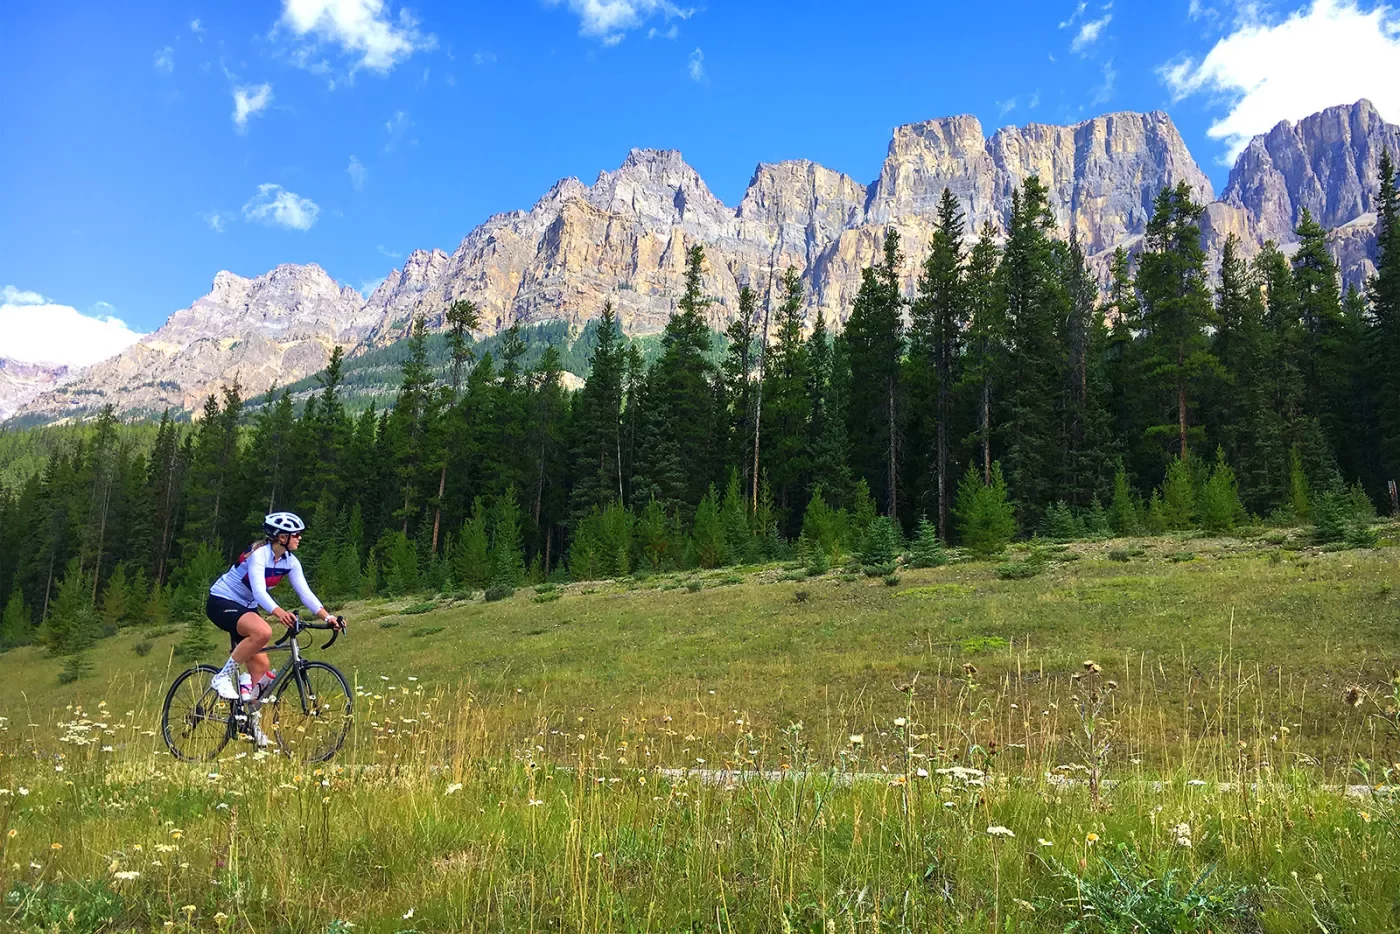 Guest cycling through grassy meadow, large, craggy mountain peaks in background.